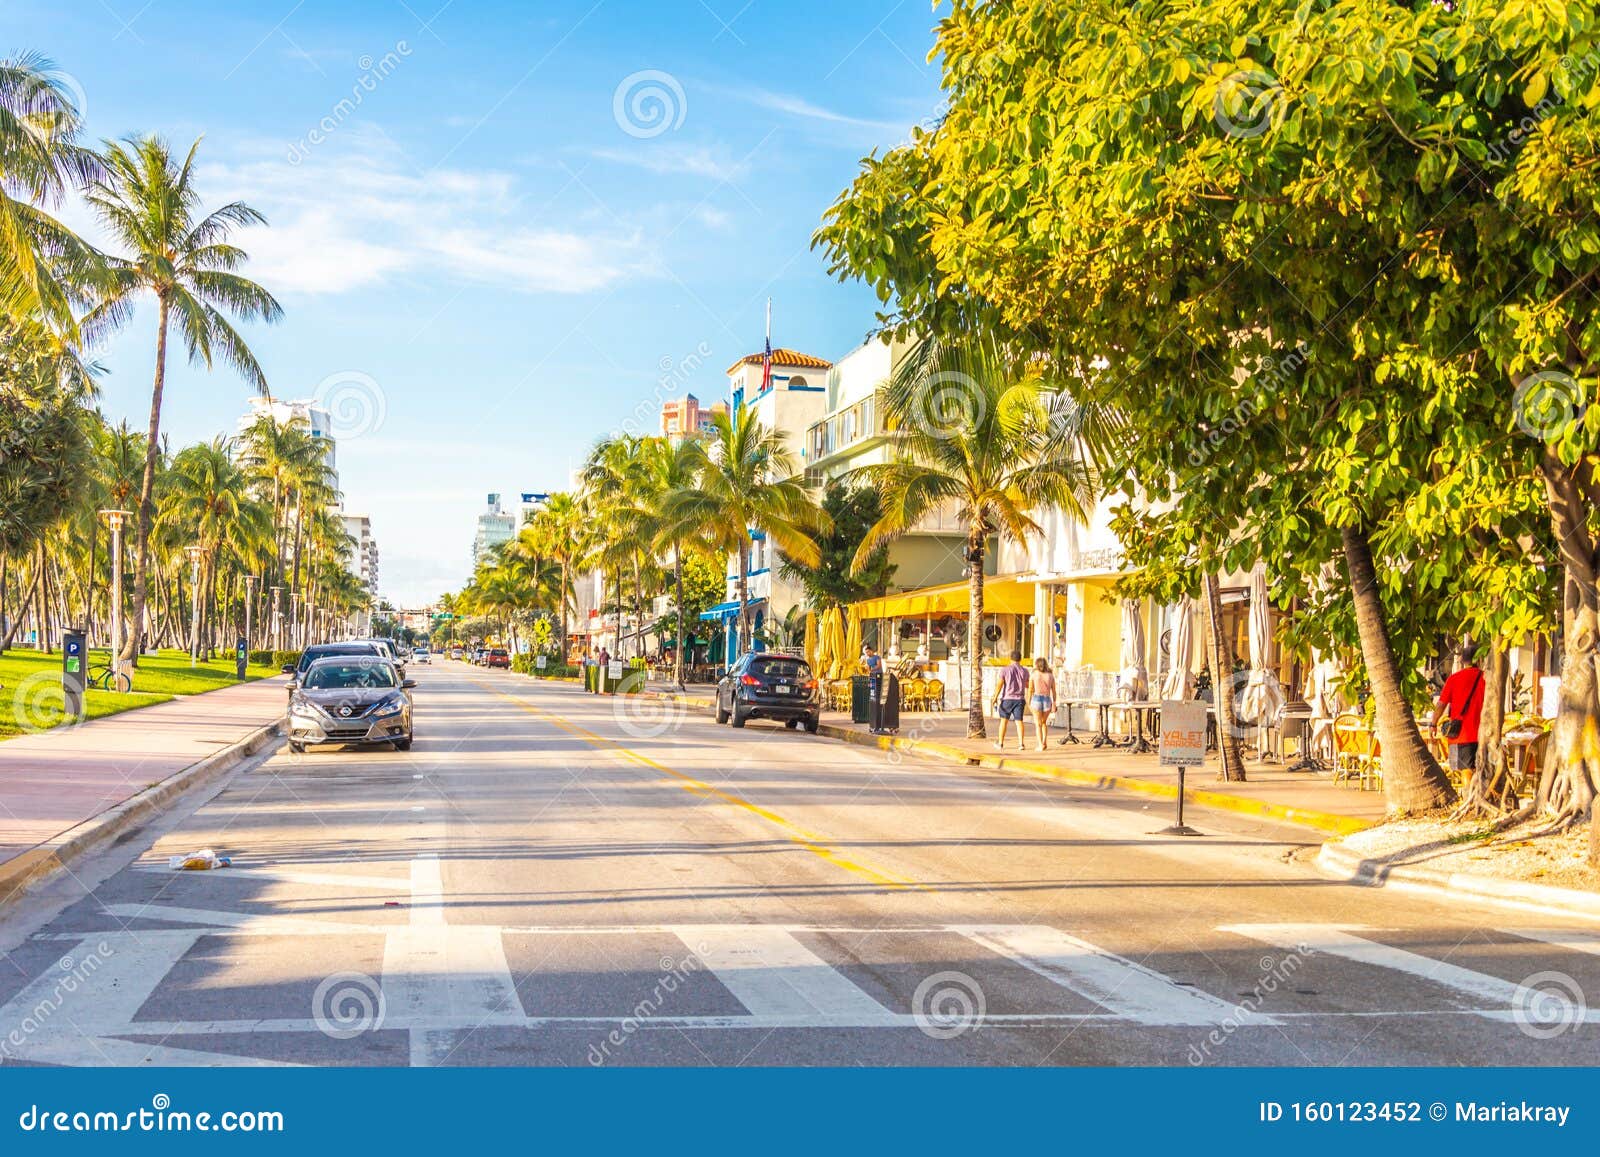 Miami, USA September 09, 2019 the View of Famous Ocean Drive Street